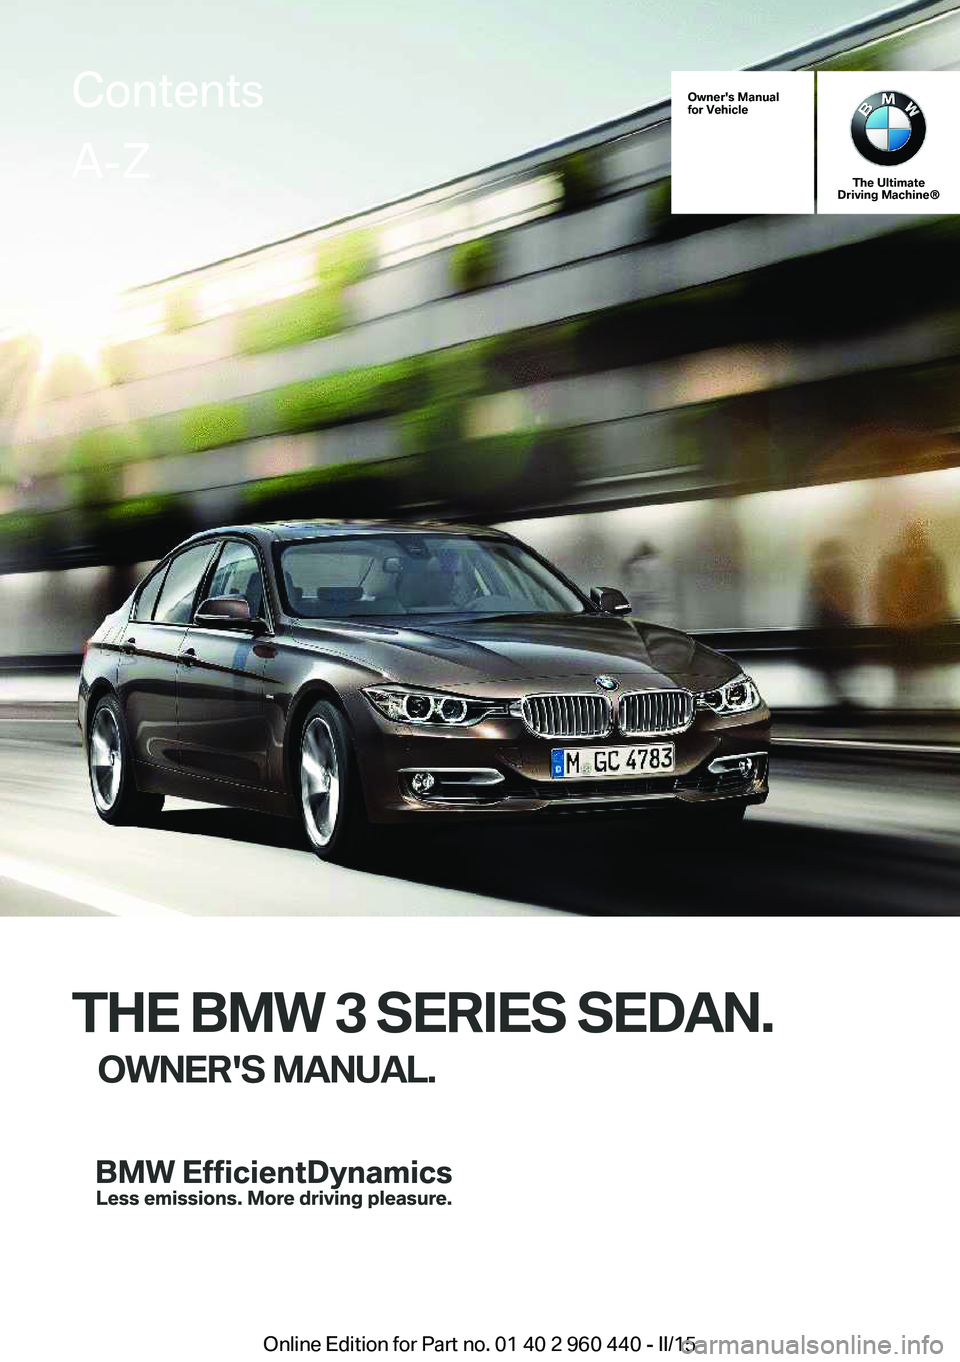 BMW 335I XDRIVE SEDAN 2015  Owners Manual Owner's Manual
for Vehicle
The Ultimate
Driving Machine®
THE BMW 3 SERIES SEDAN.
OWNER'S MANUAL.
ContentsA-Z
Online Edition for Part no. 01 40 2 960 440 - II/15   